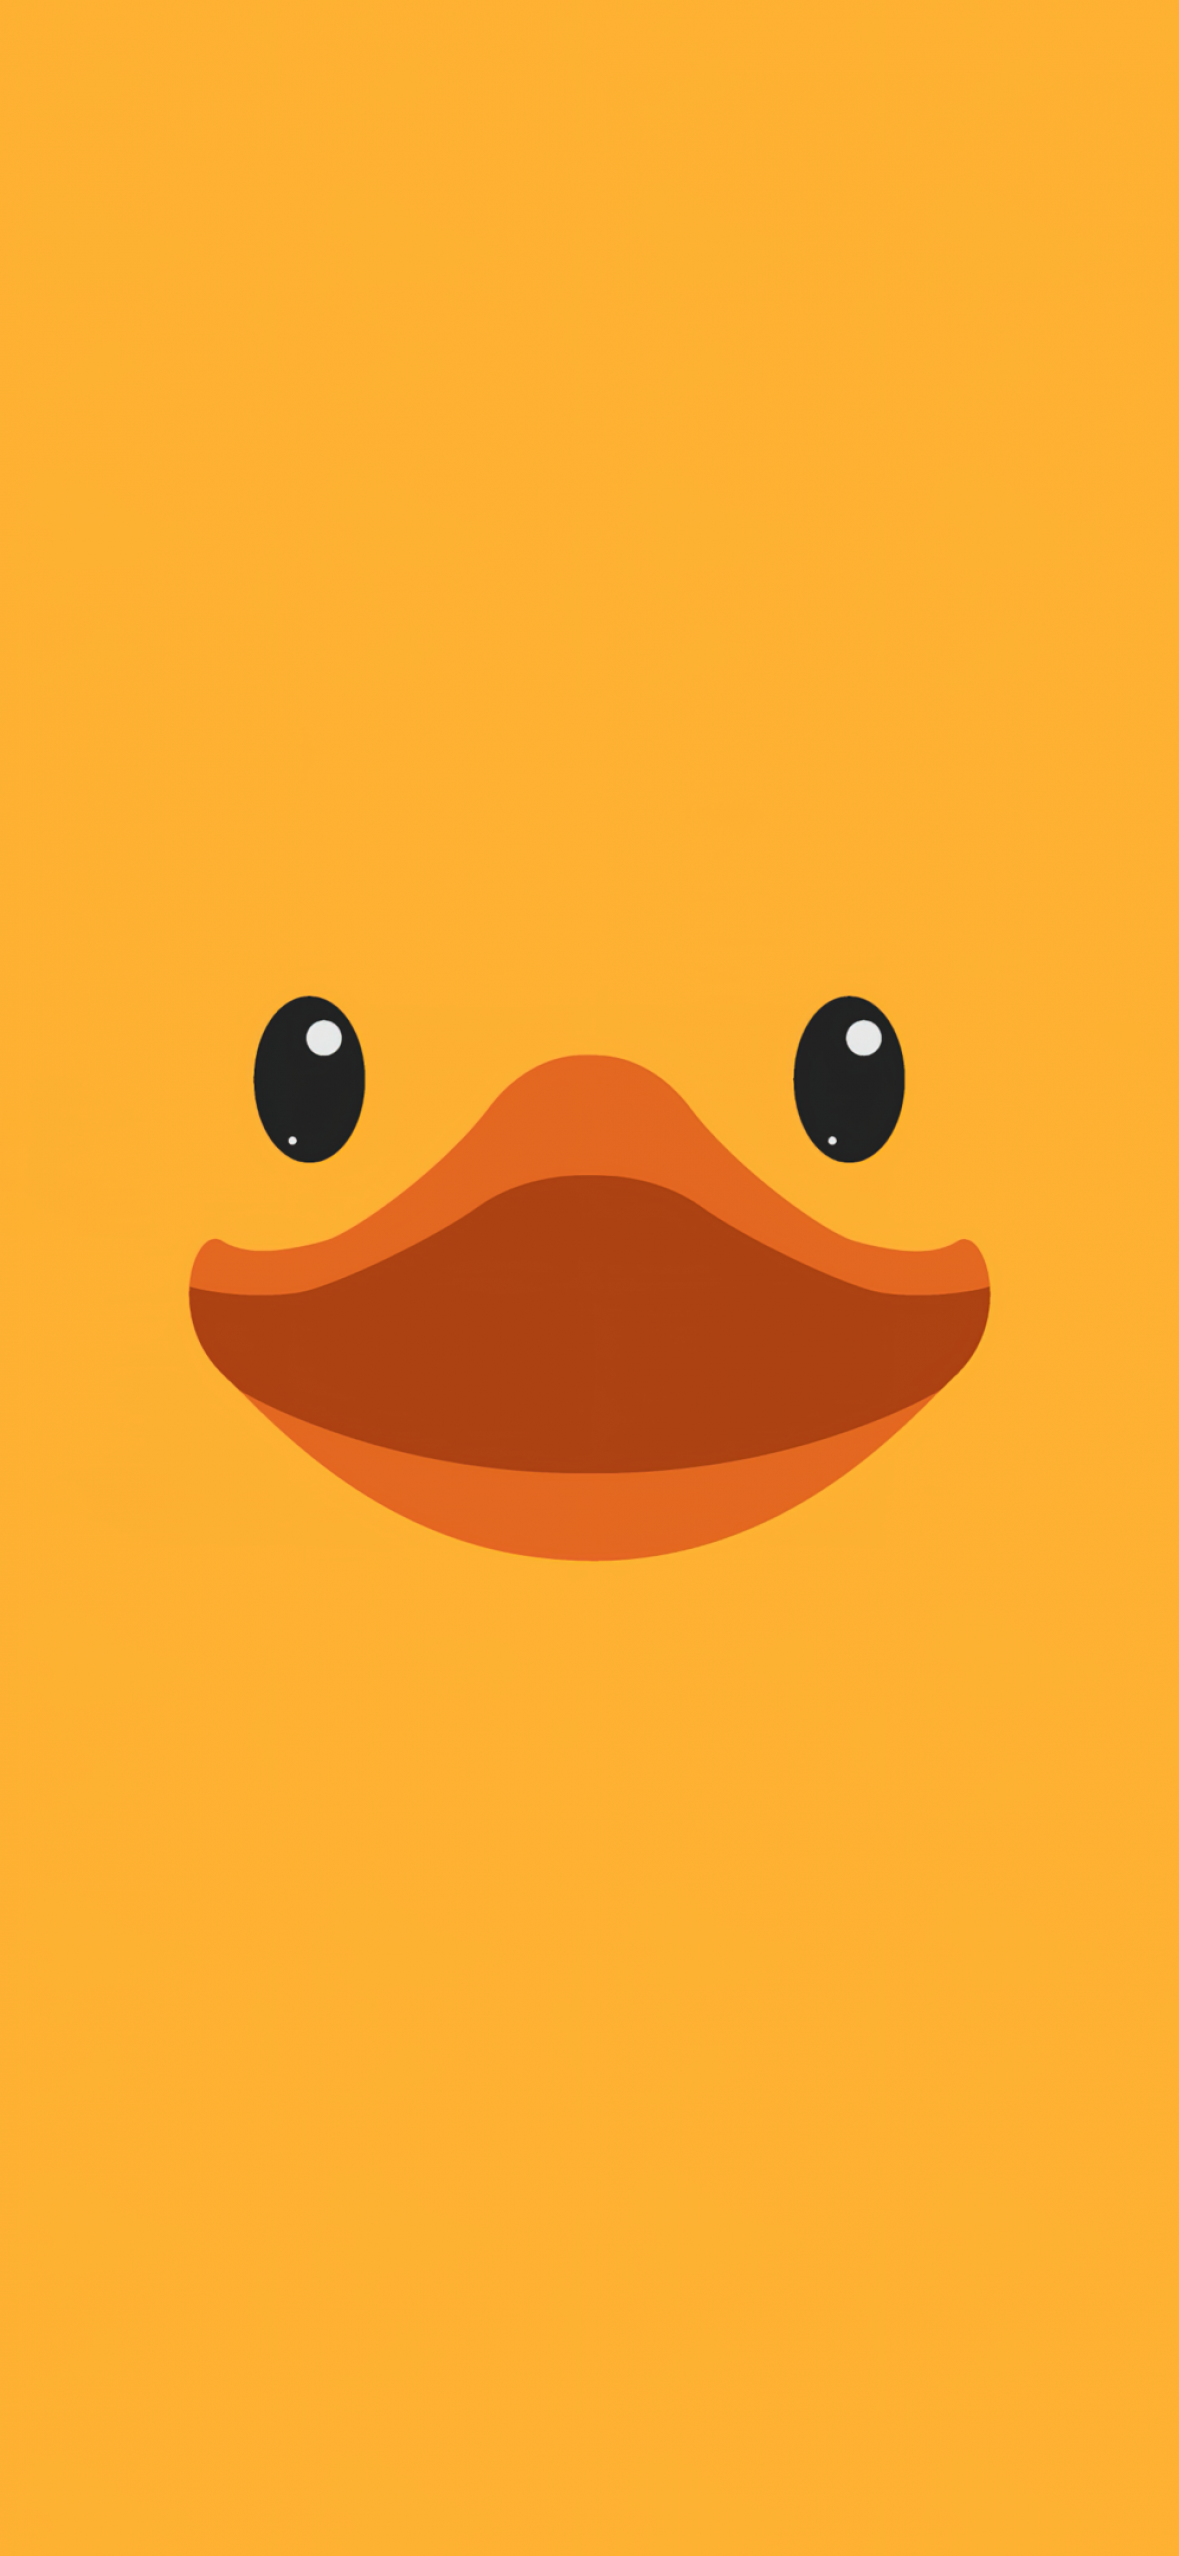 30k Rubber Duck Pictures  Download Free Images on Unsplash